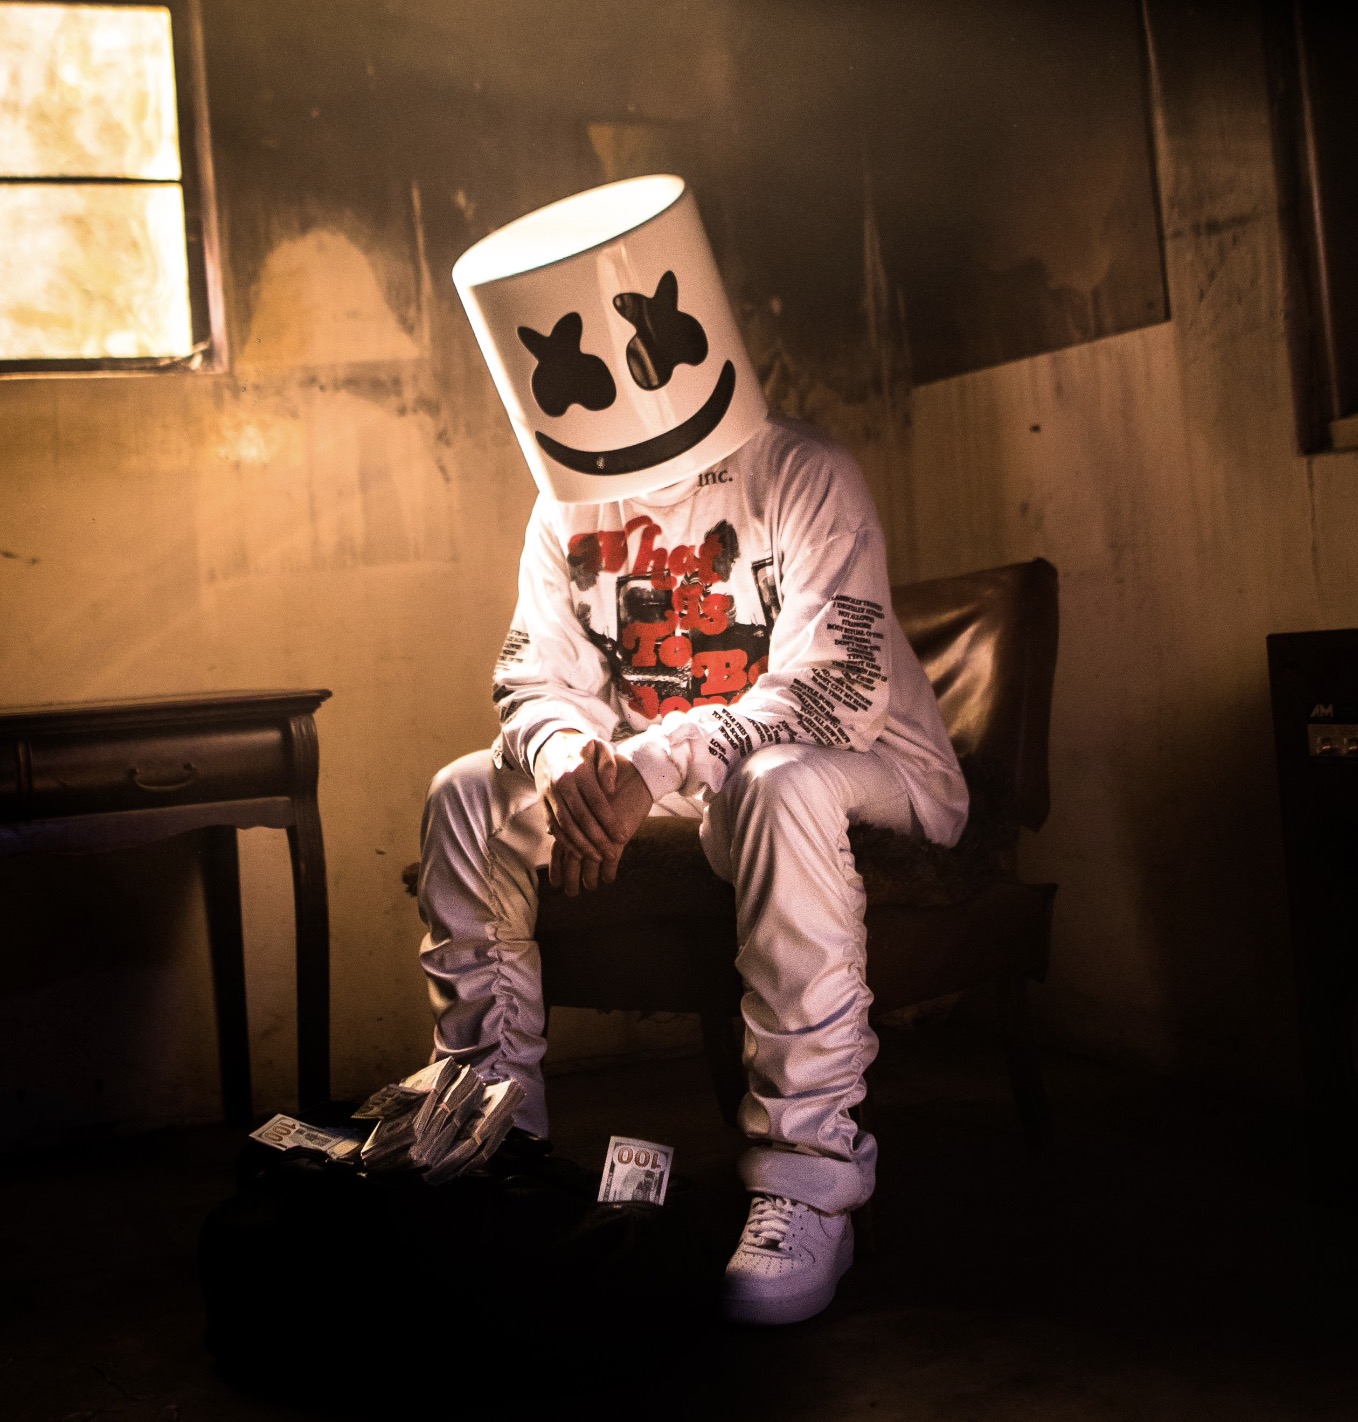 Marshmello X Imanbek Ft Usher Too Much S Find And Share On Giphy